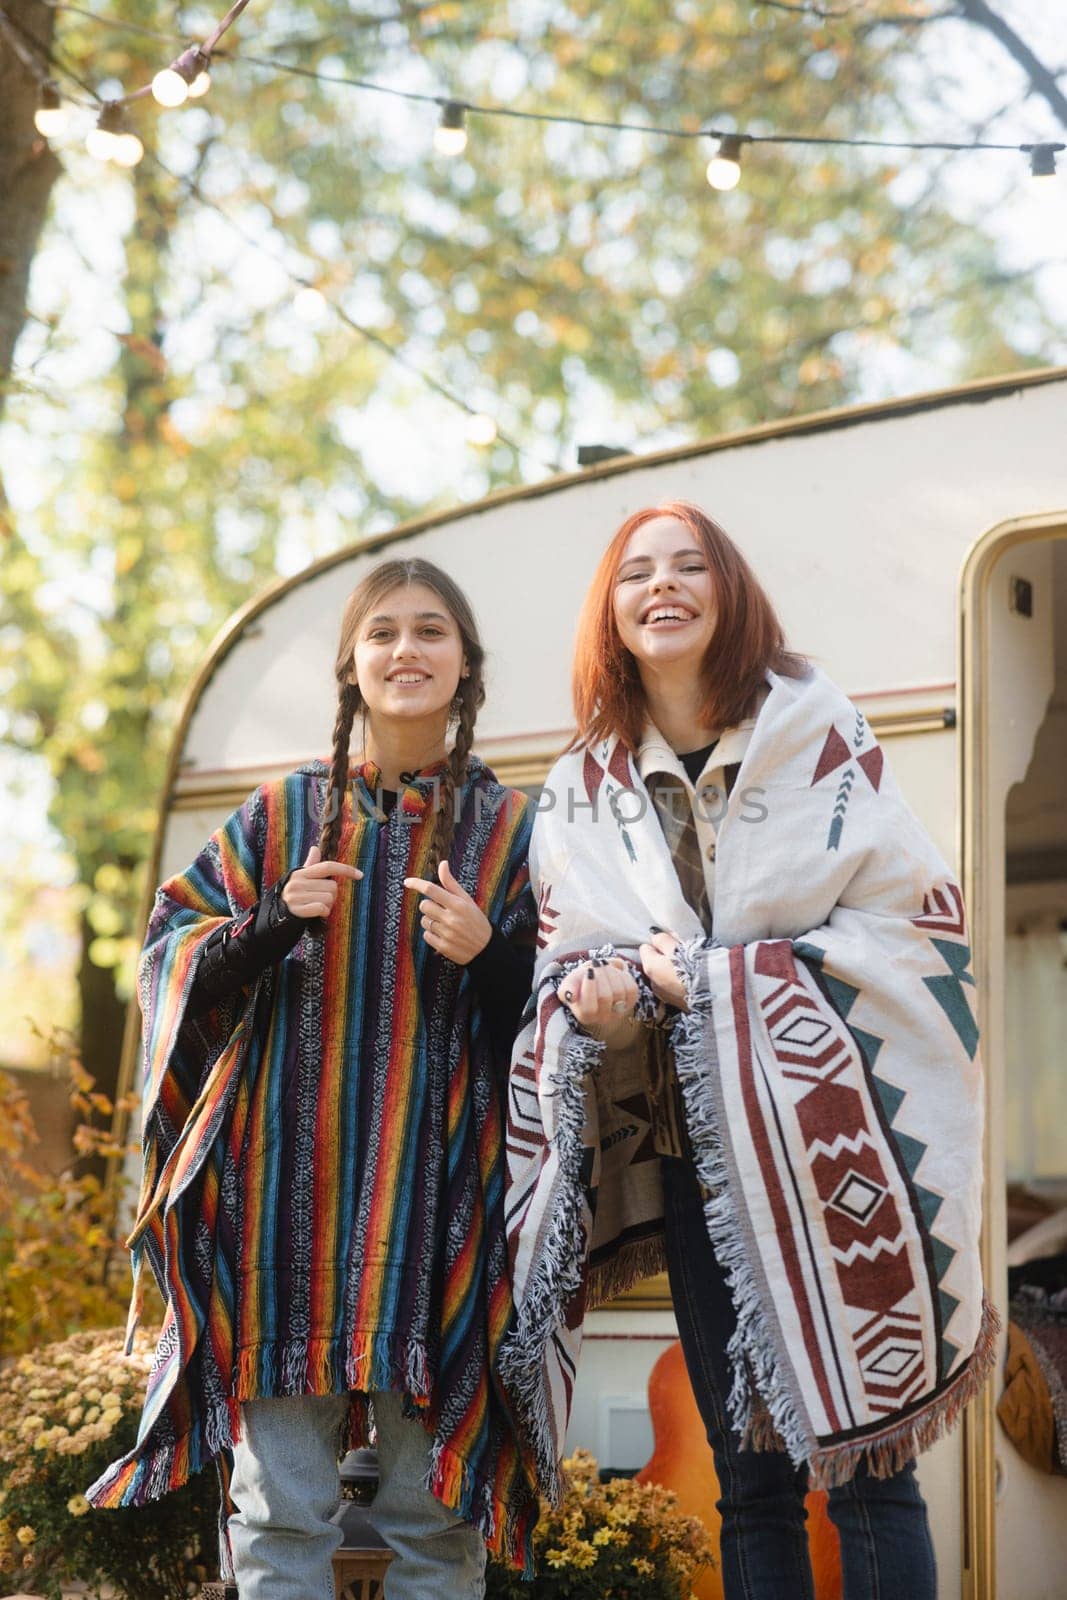 Two hip girls showcase their hippie-inspired outfits against the trailer setting. High quality photo